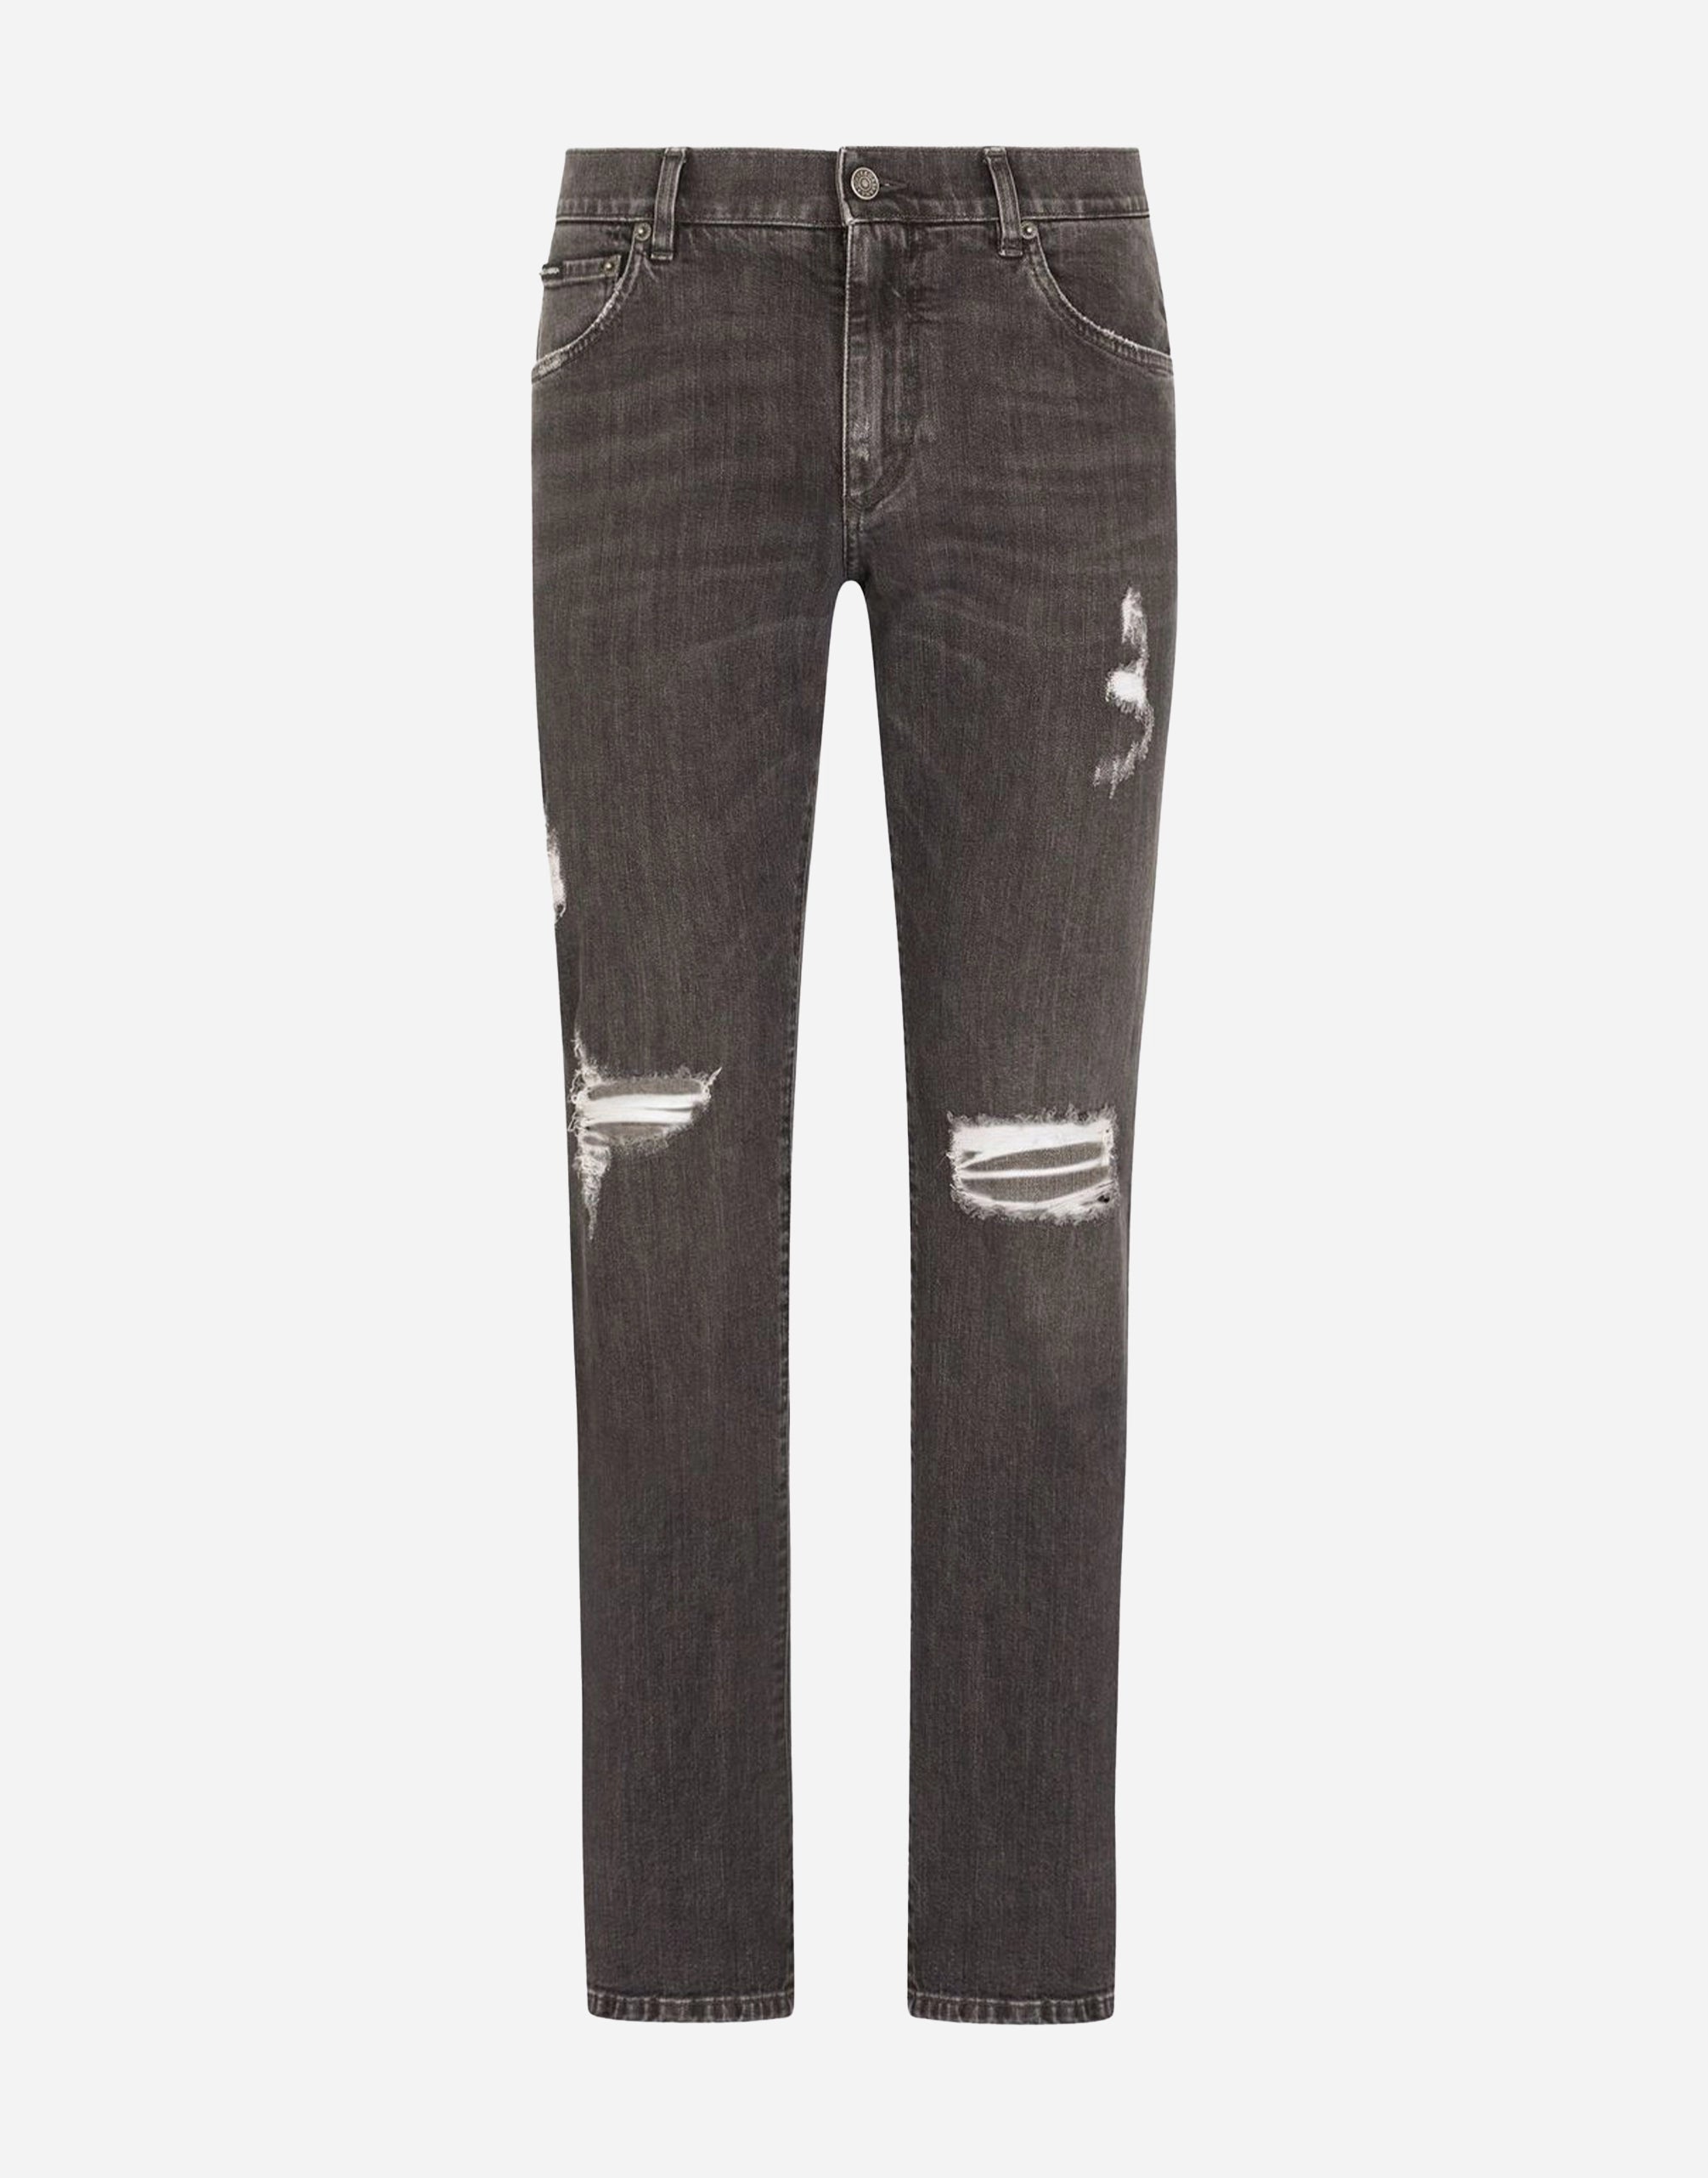 Dolce & Gabbana Slim-Fit Cotton Stretch Jeans With Rips